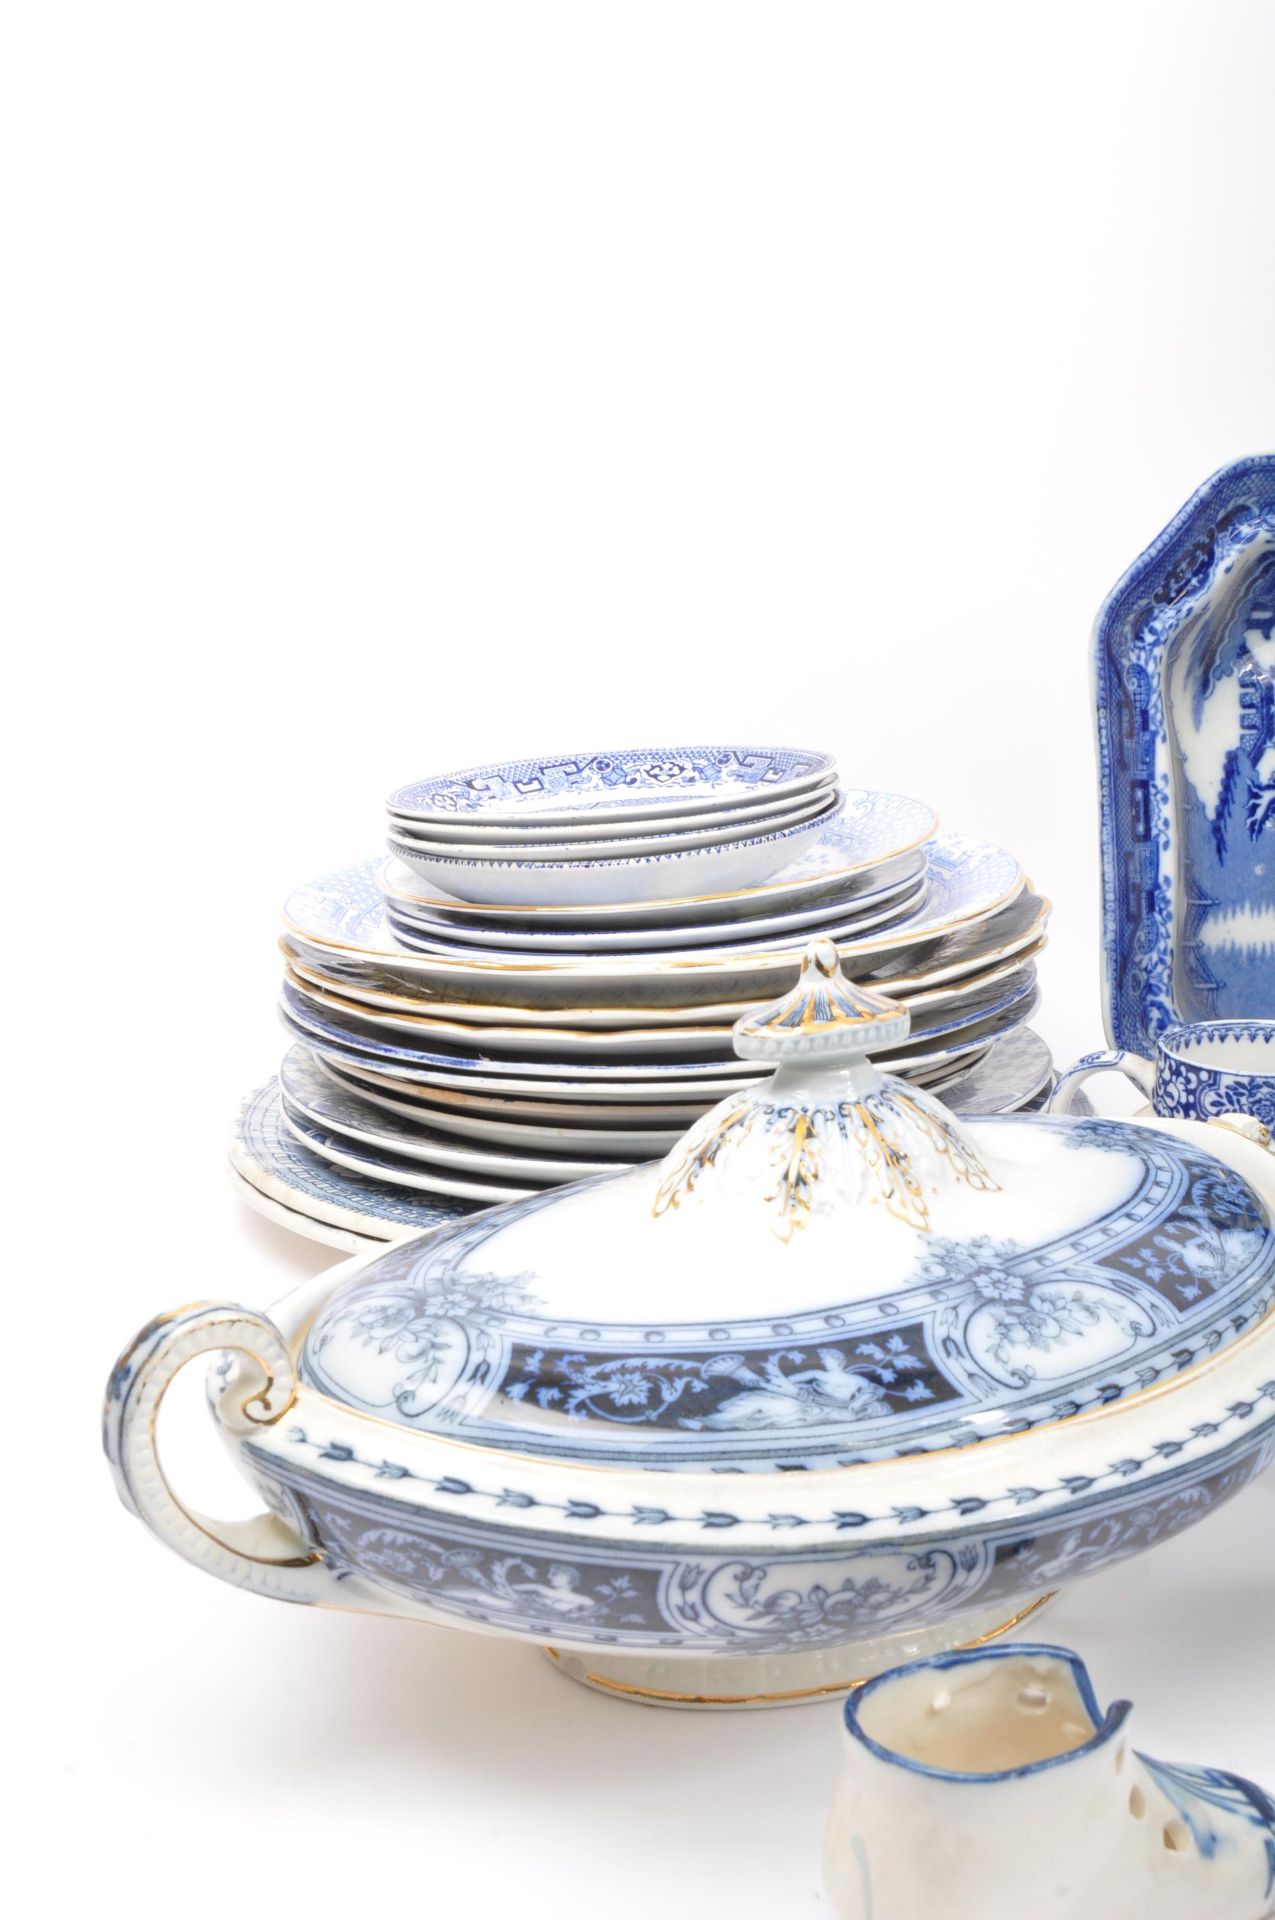 LARGE COLLECTION OF 19TH CENTURY AND LATER BLUE & WHITE CHINA - Image 2 of 5